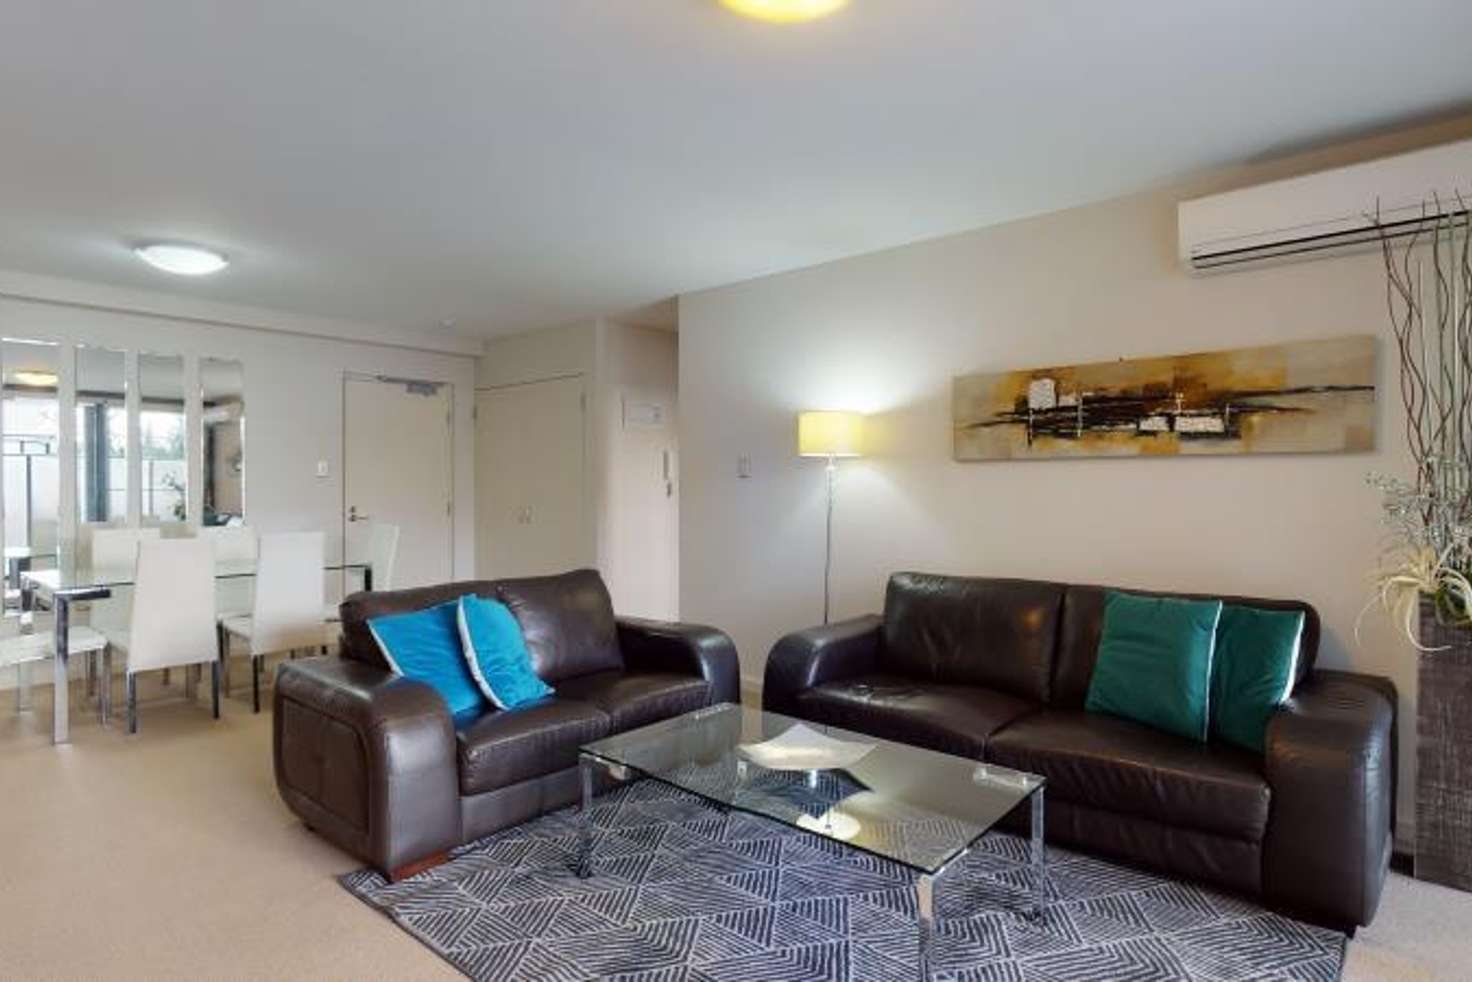 Main view of Homely apartment listing, 9/69 Milligan Street, Perth WA 6000